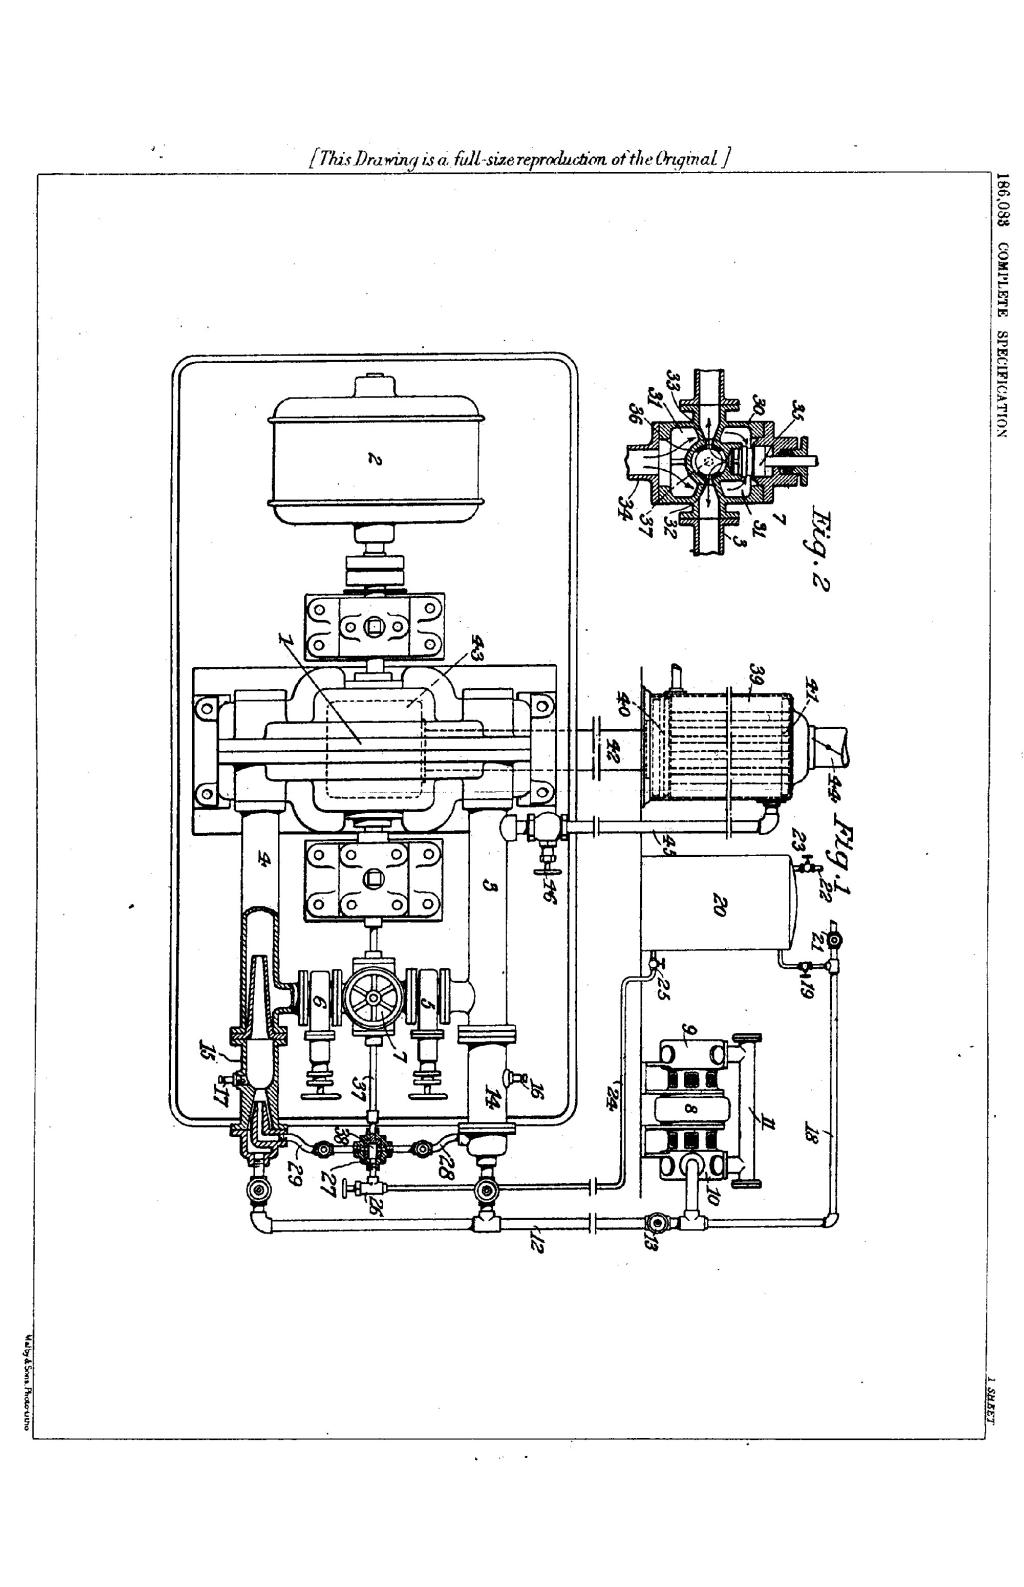 Nikola Tesla British Patent 186,083 - Improved Method of and Apparatus for the Economic Transformation of the Energy of Steam by Turbines - Image 1